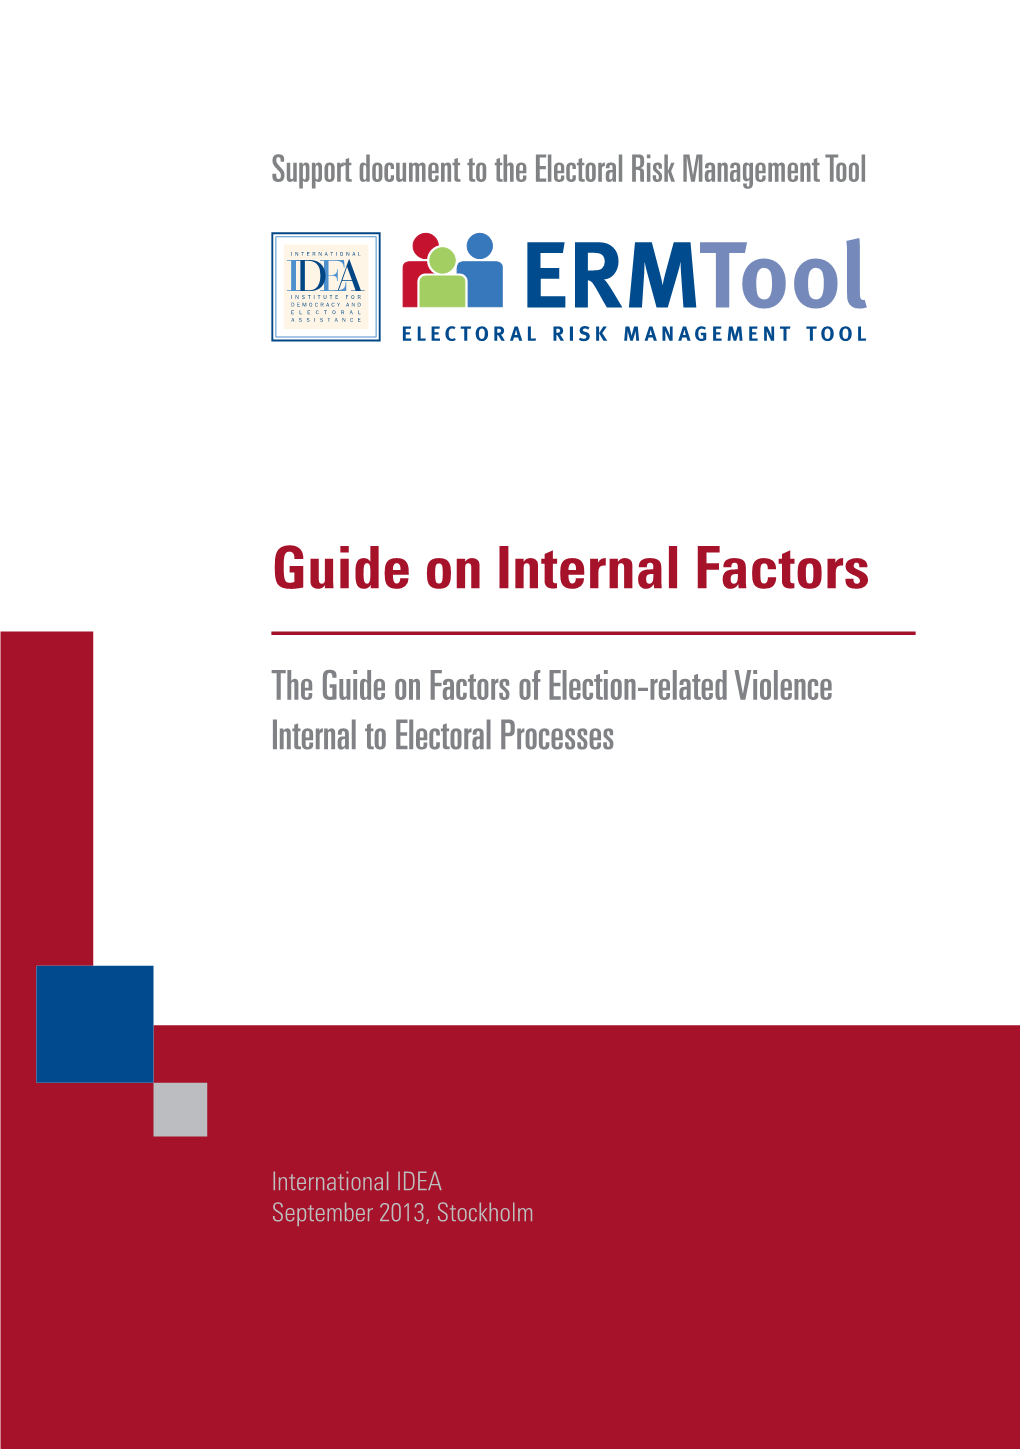 Guide on Internal Factors Is a Support Document to the Electoral Risk Management Tool